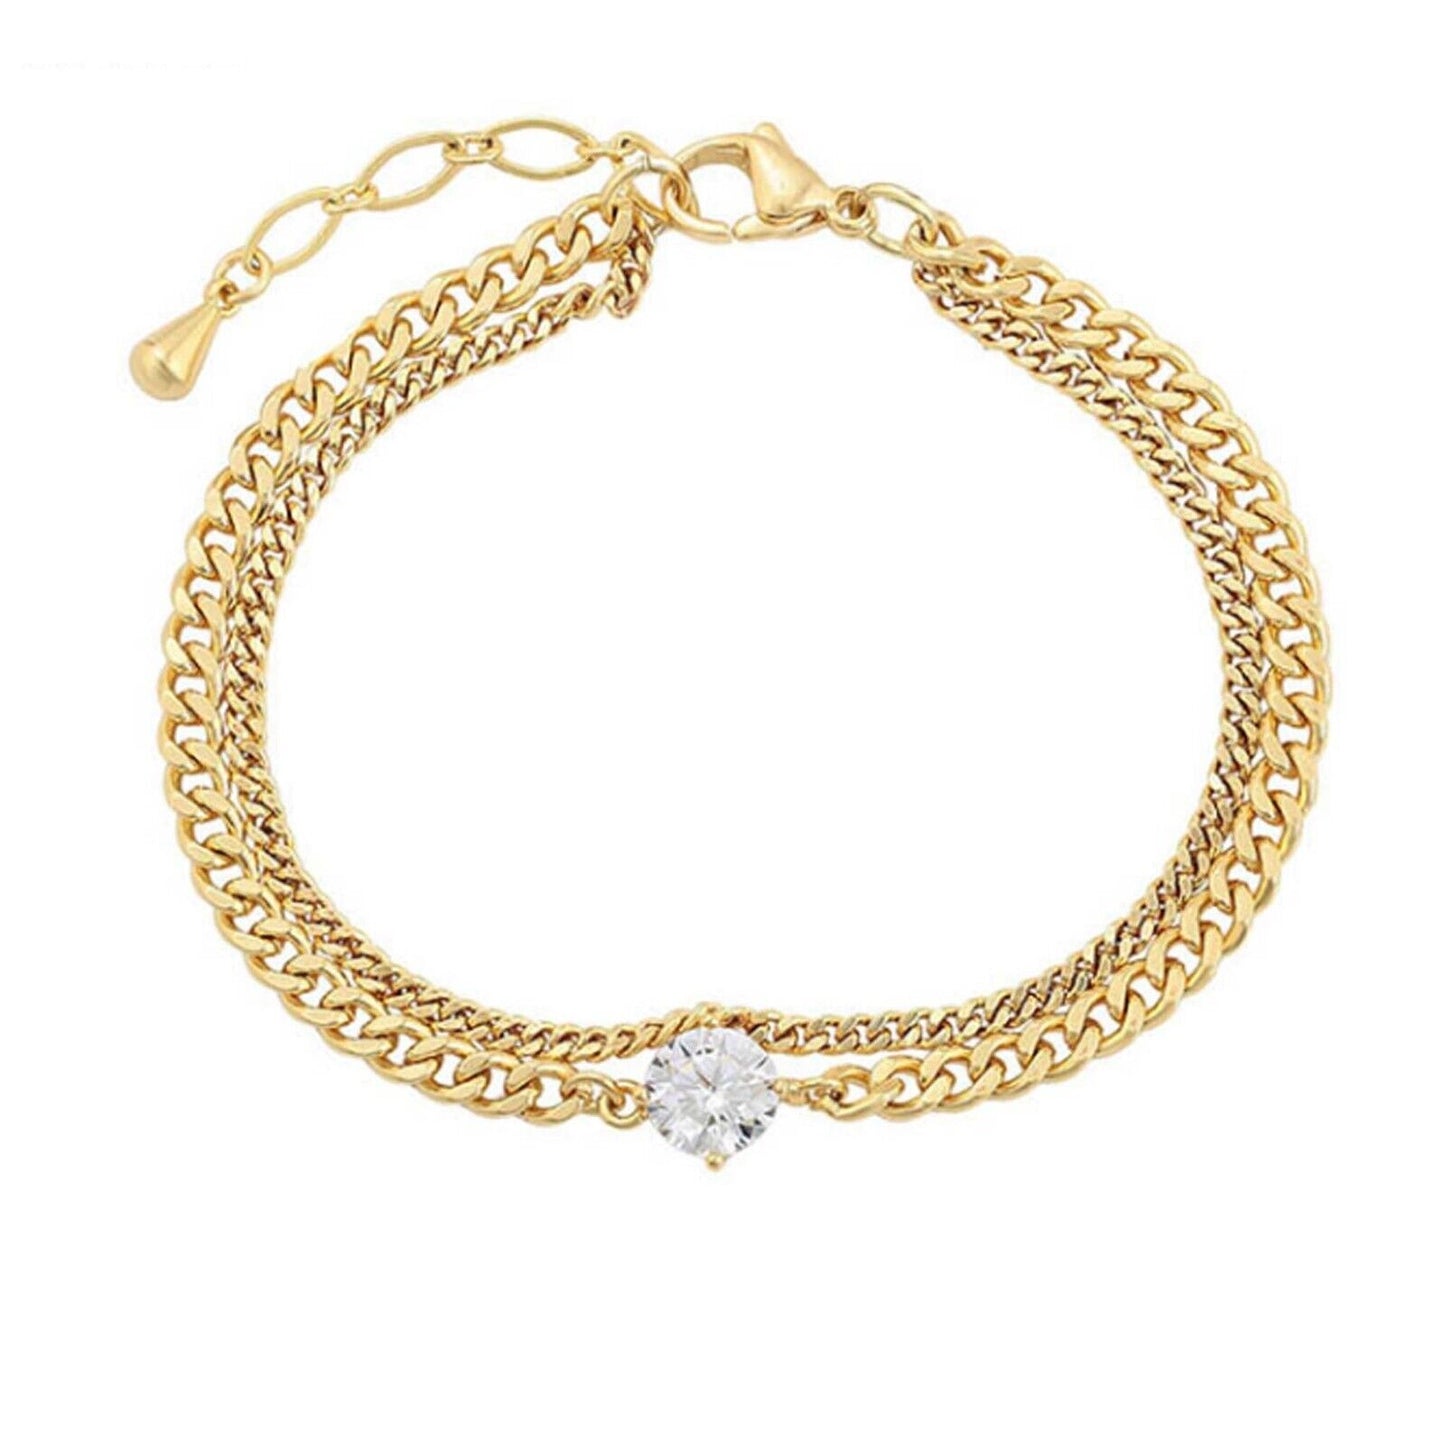 Bracelets - 14K Gold Plated. Double Chain Solitaire CZ crystal